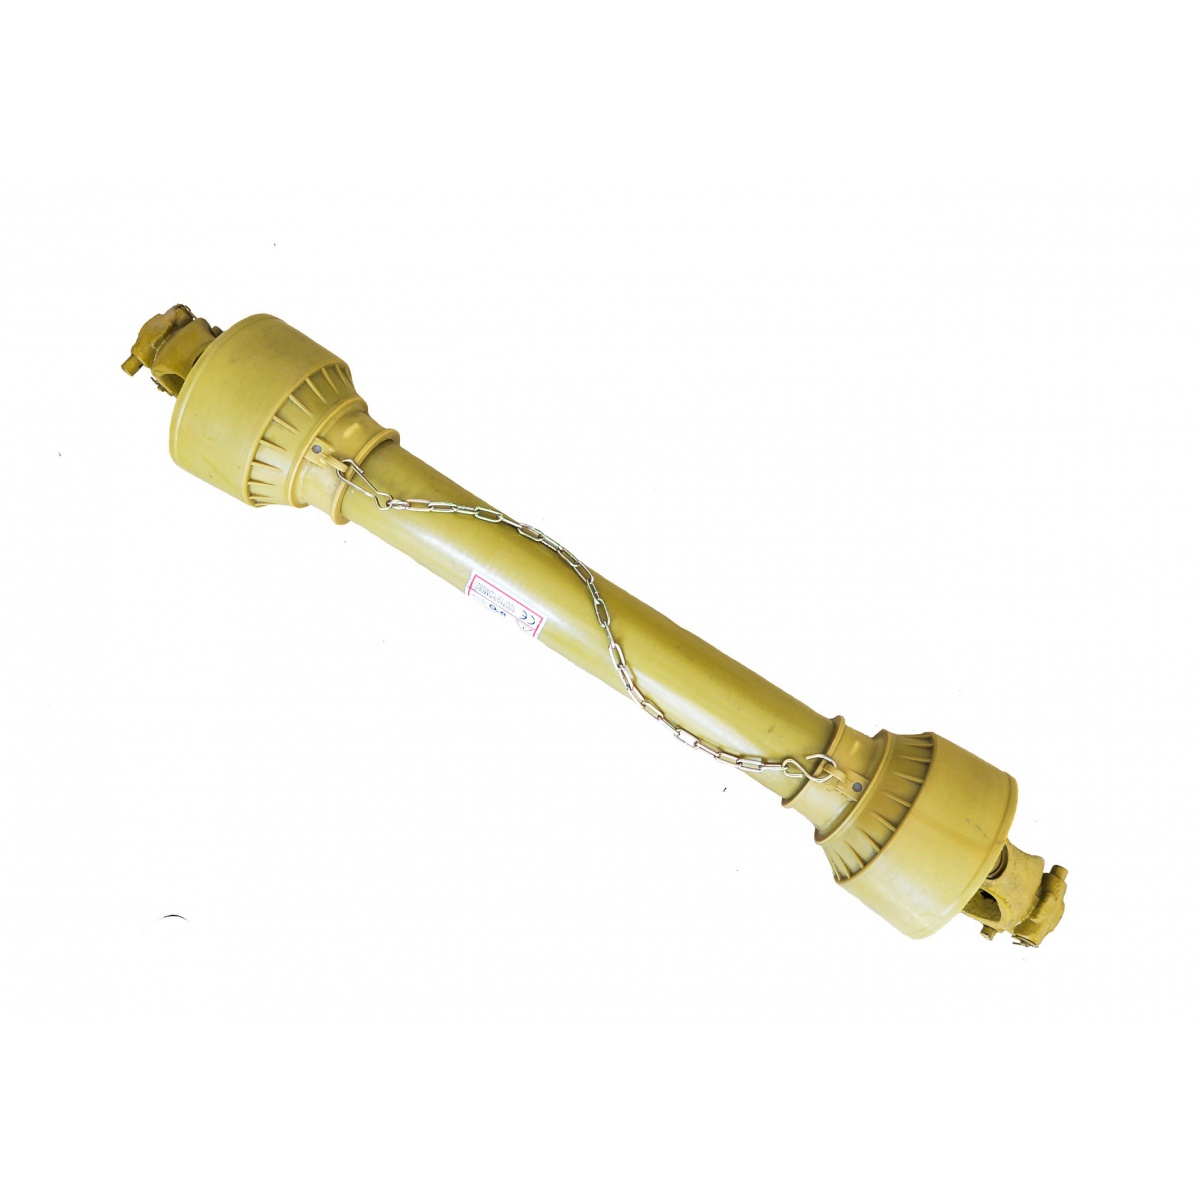 PTO shaft 07B - 80 cm / up to 105 HP